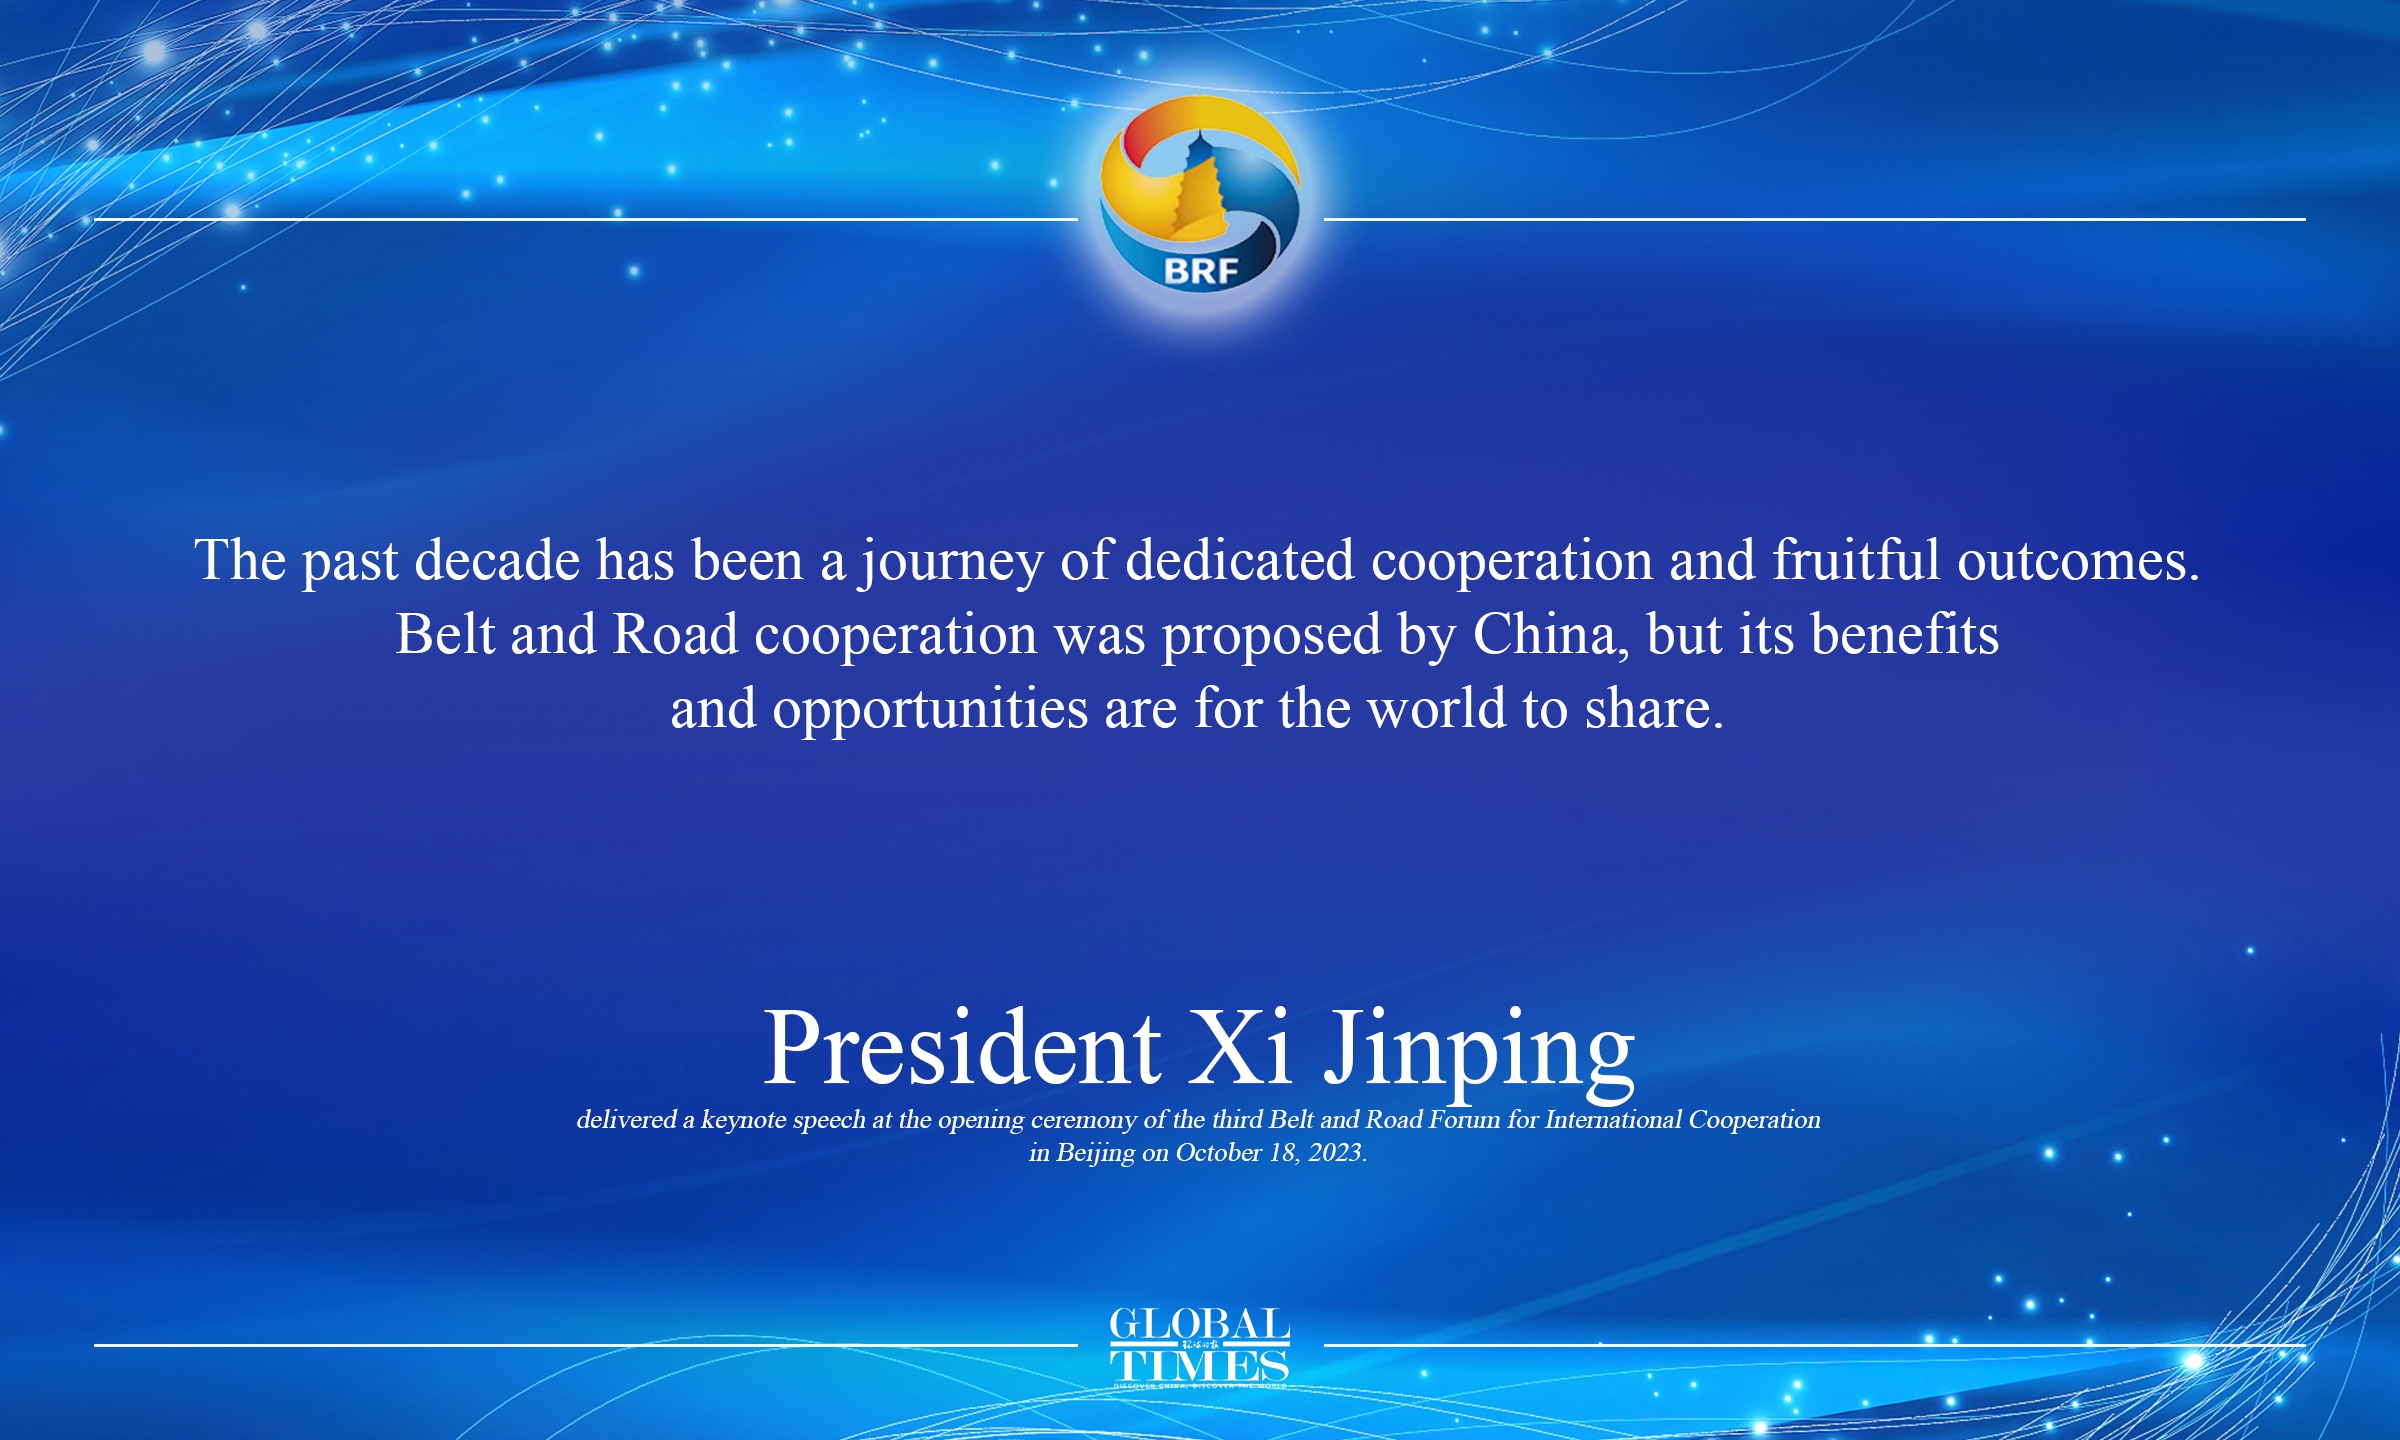 Chinese President Xi Jinping delivered a keynote speech at the opening ceremony of the third Belt and Road Forum for International Cooperation. Here are some highlights of Xi's remarks:

